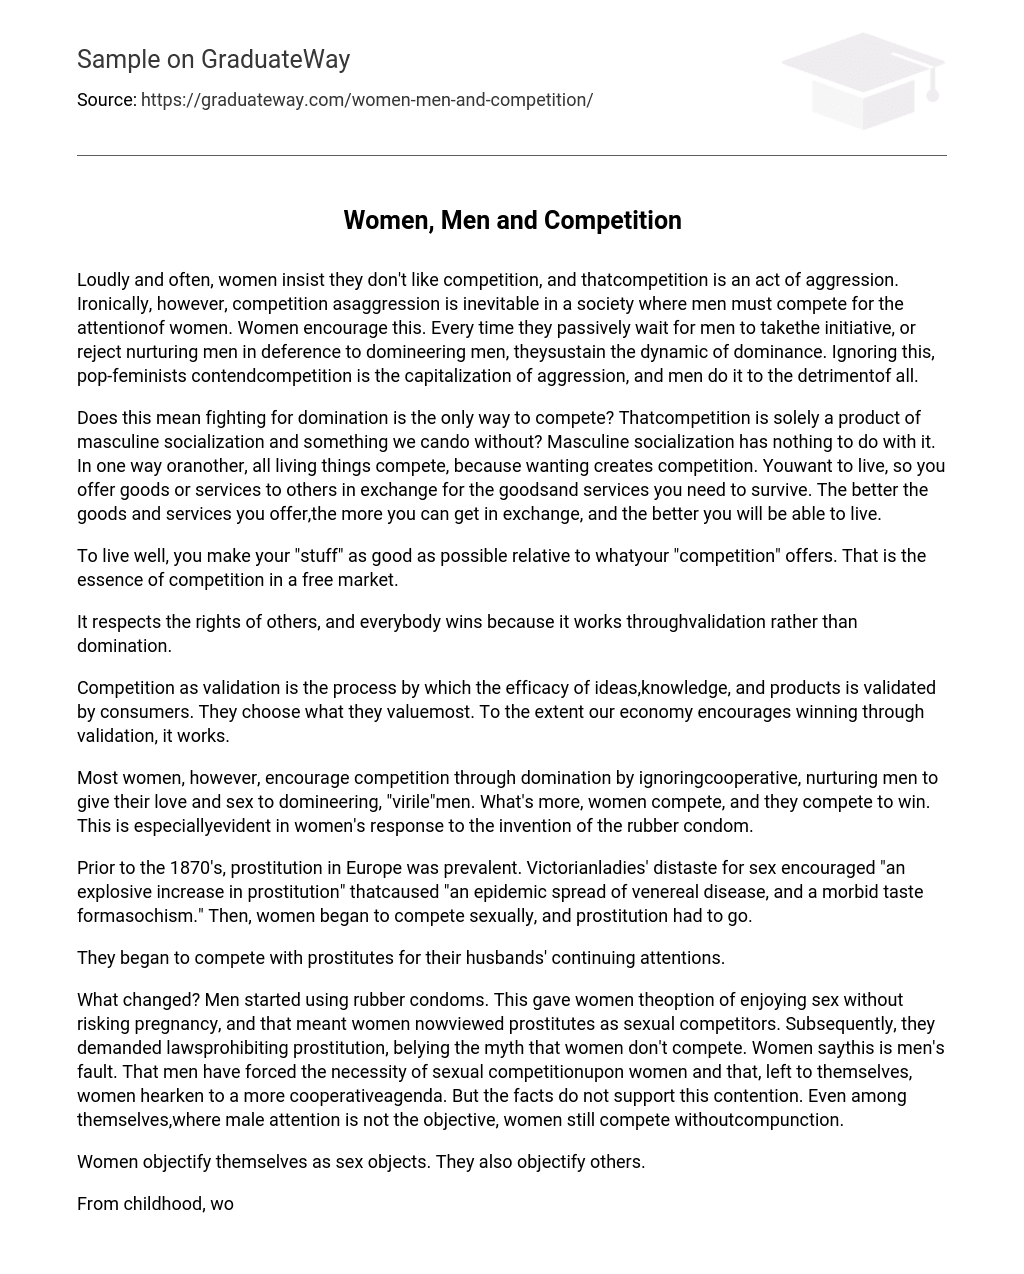 Women, Men and Competition